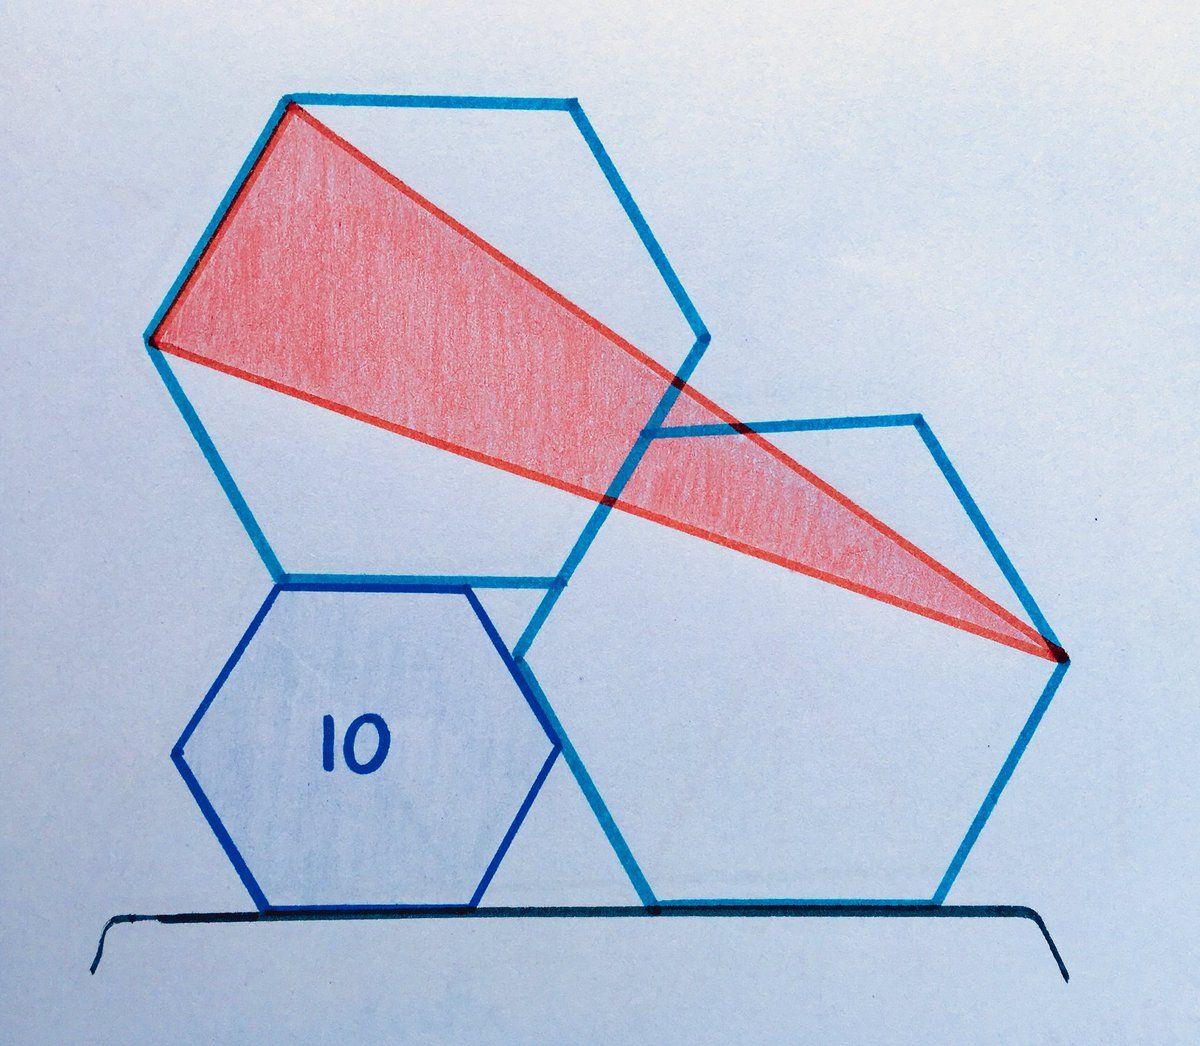 Hexagon in a Red Triangle Logo - Catriona Shearer of the regular hexagons are